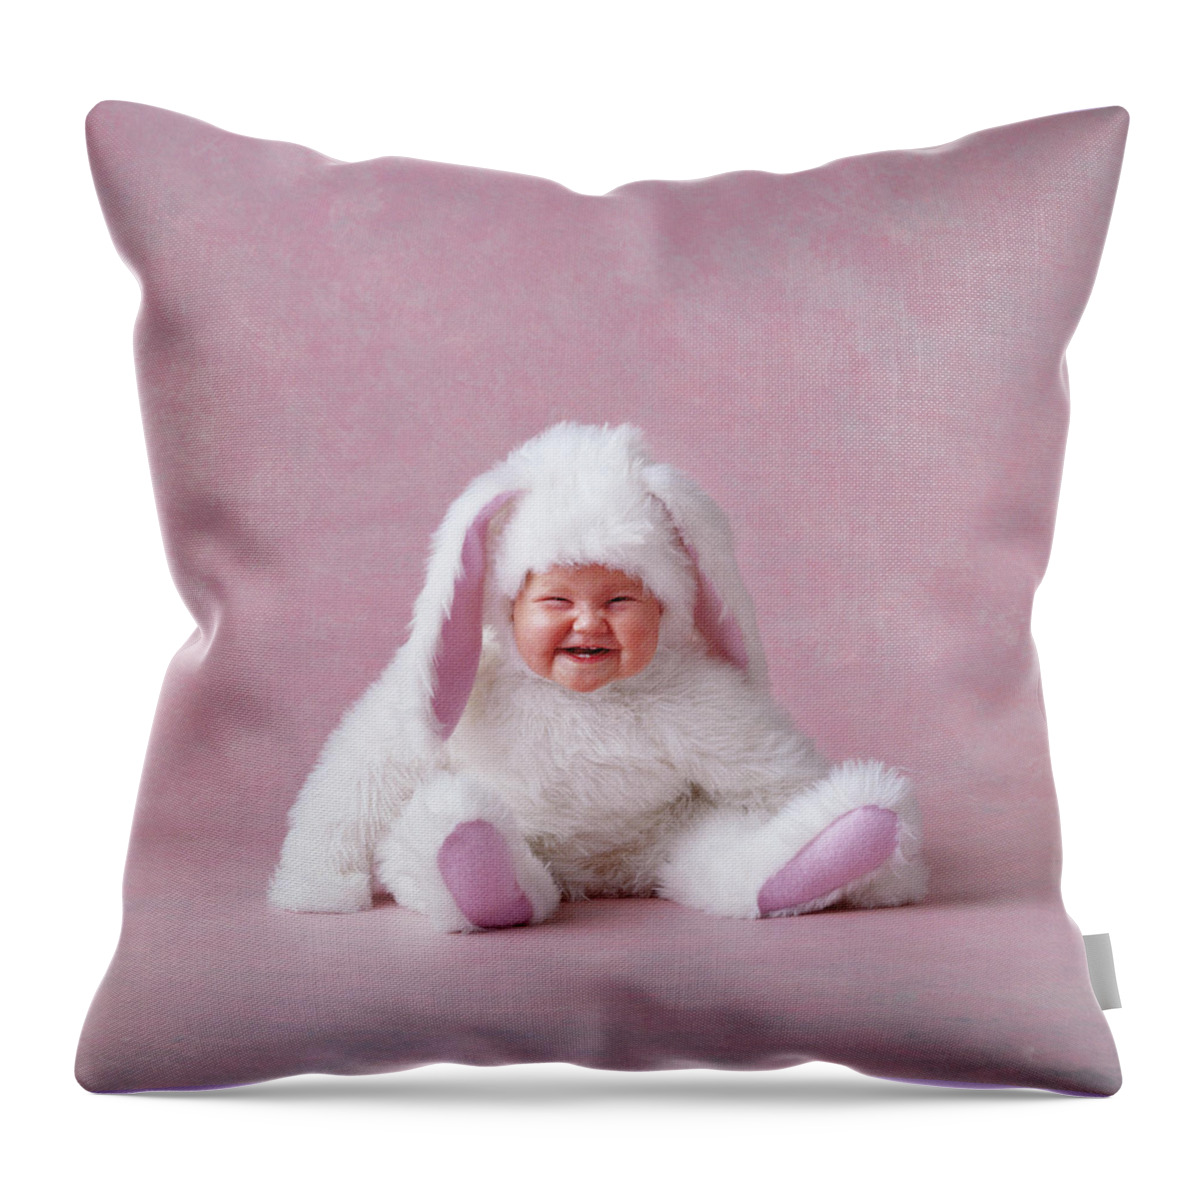 Bunnies Throw Pillow featuring the photograph Baby Bunny #4 by Anne Geddes